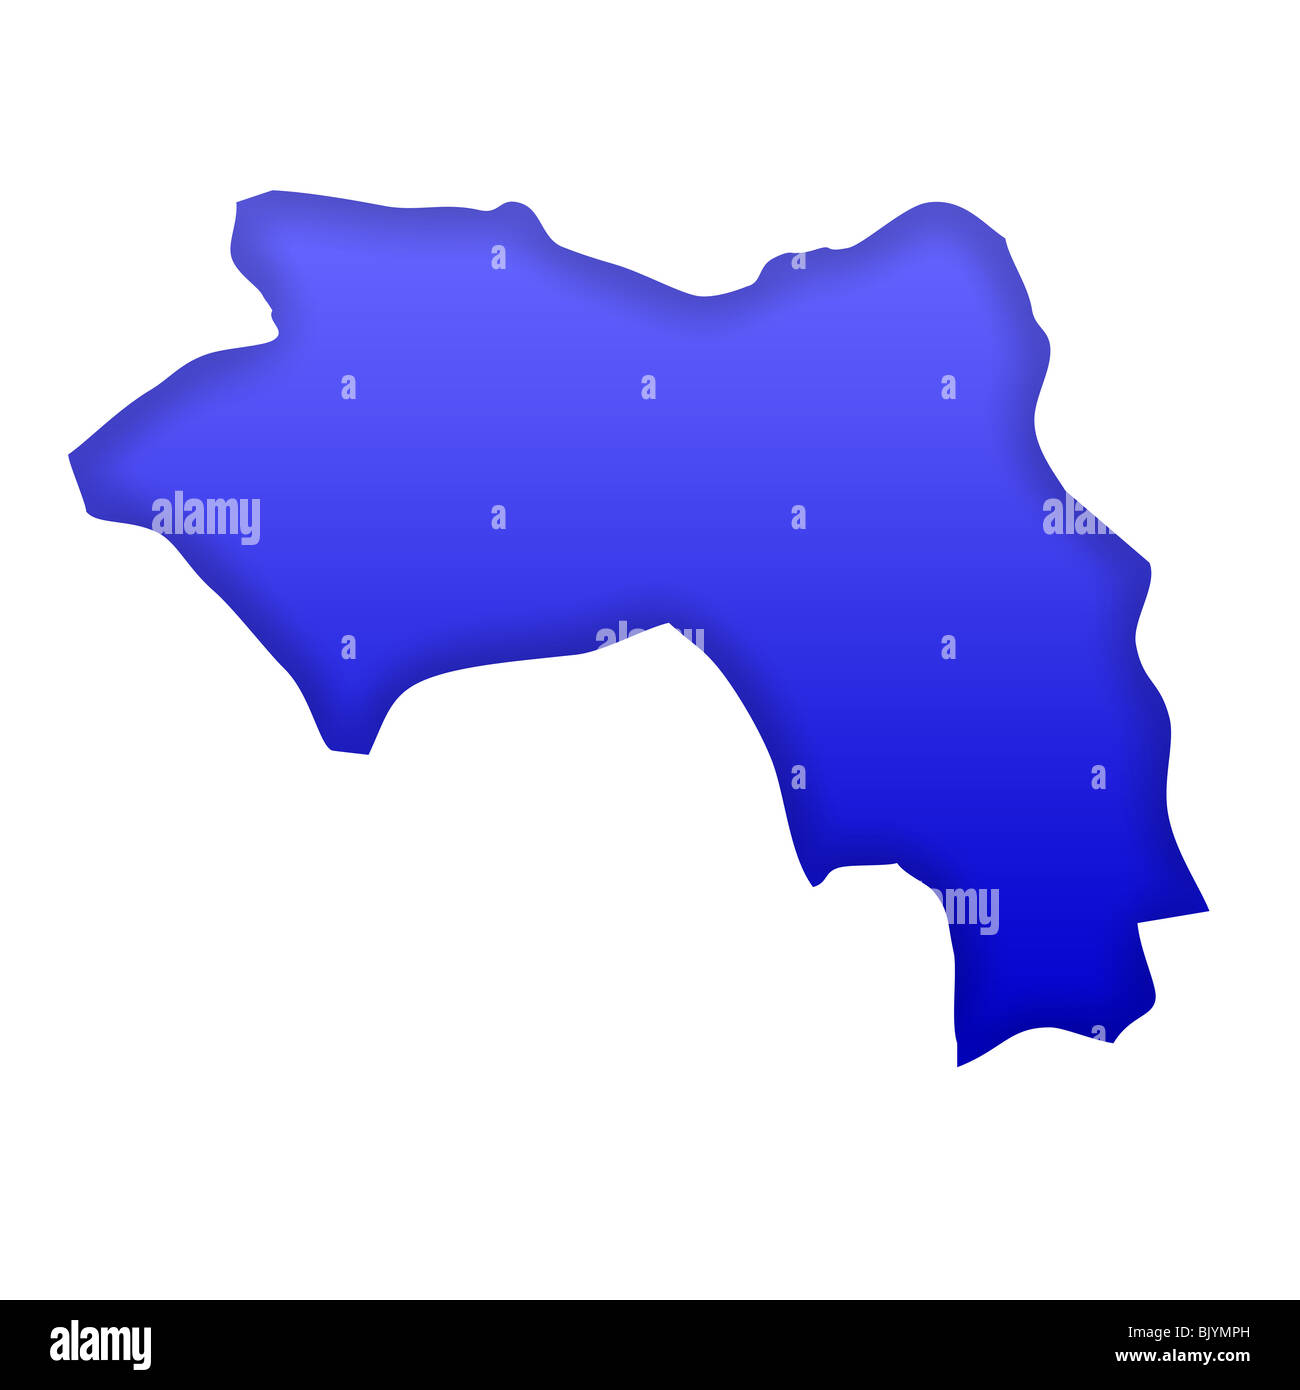 Guinea map in blue isolated on white background with clipping path and copy space. Stock Photo